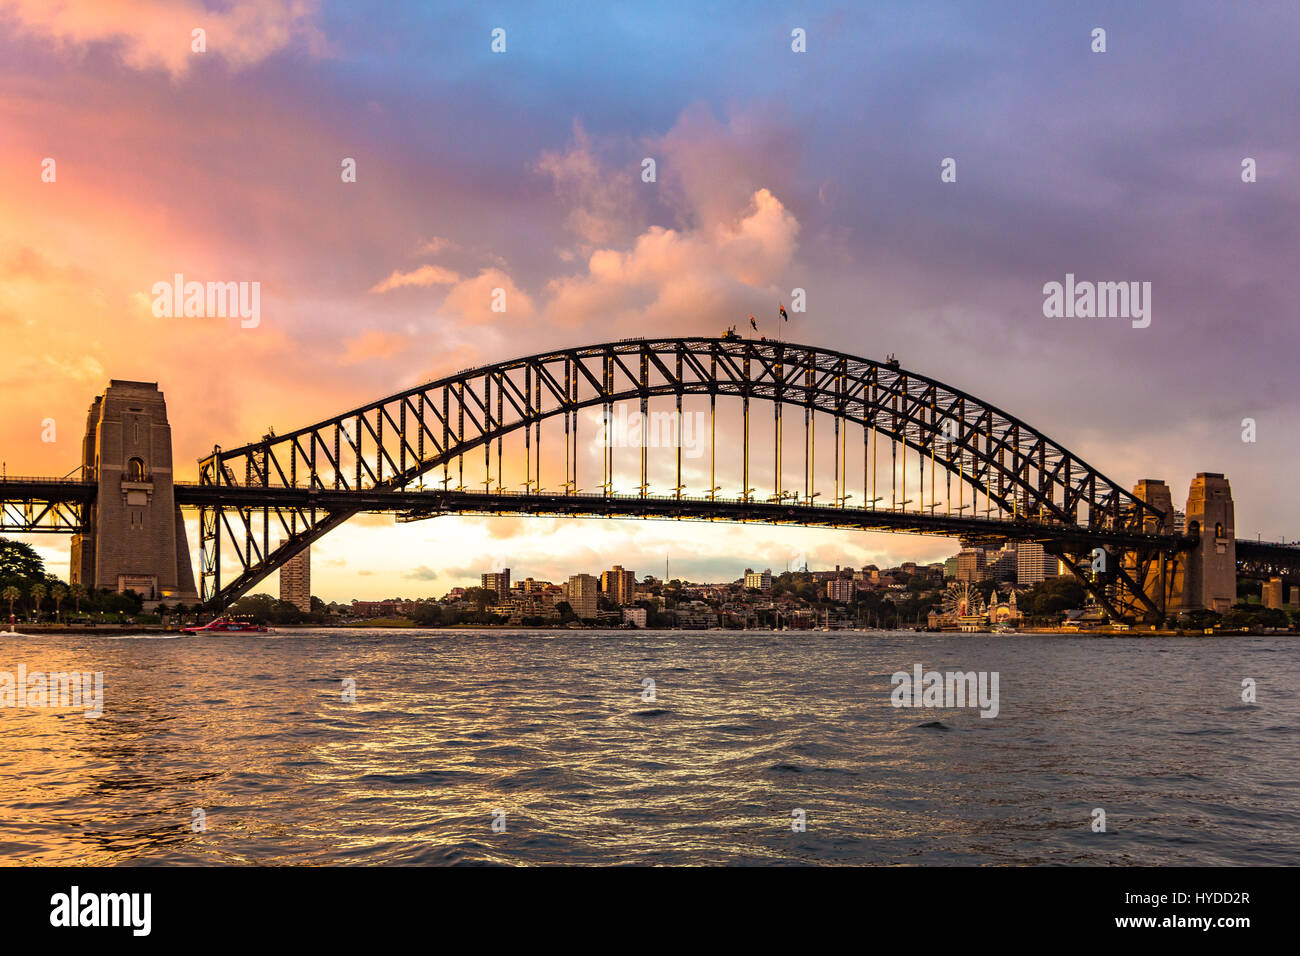 The Sydney Harbour Bridge with a dramatic sky Stock Photo